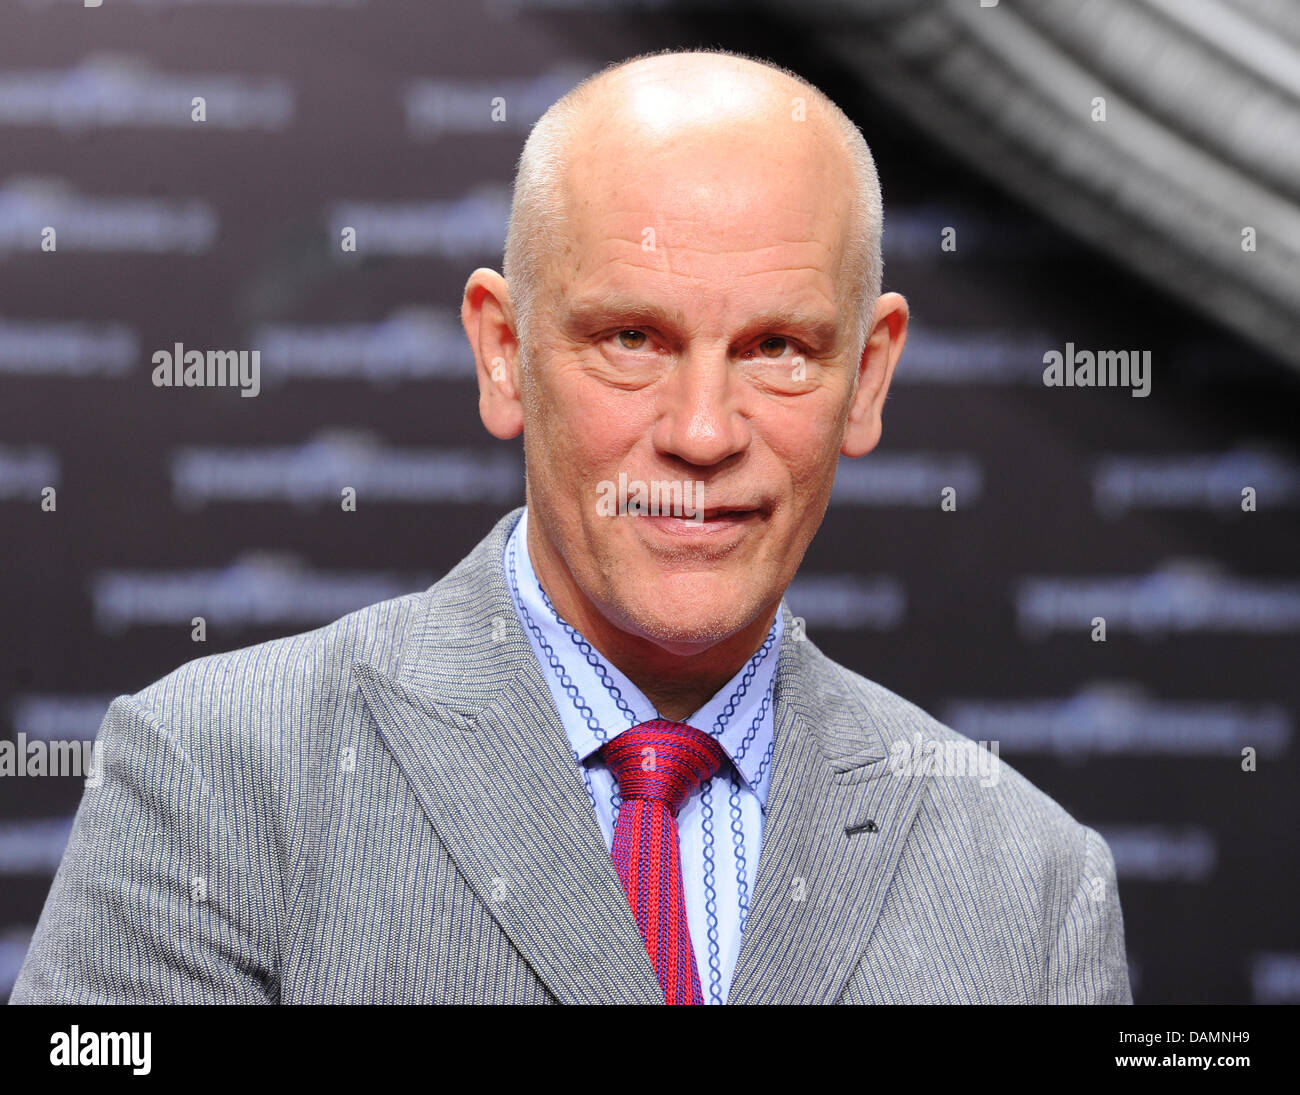 US actor John Malkovich attends the European premiere of his new film 'Transformers 3' at the Cinestar cinema at Potsdamer Platz in Berlin, Germany, 25 June 2011. 'Transformers 3' will open in German cinemas on 29 June 2011. Photo: Jens Kalaene Stock Photo